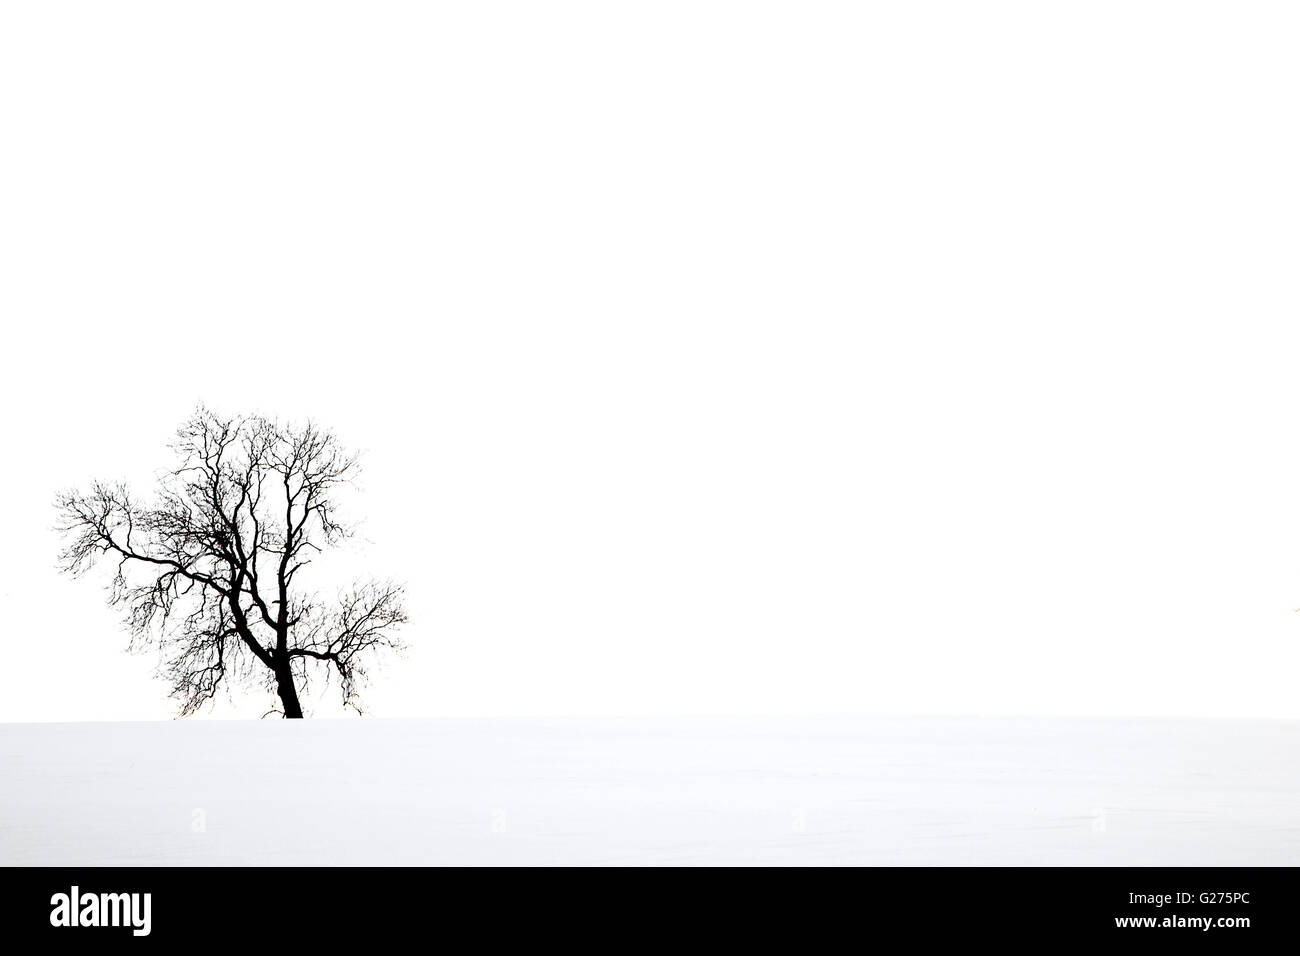 Snowy landscape with isolated tree Stock Photo